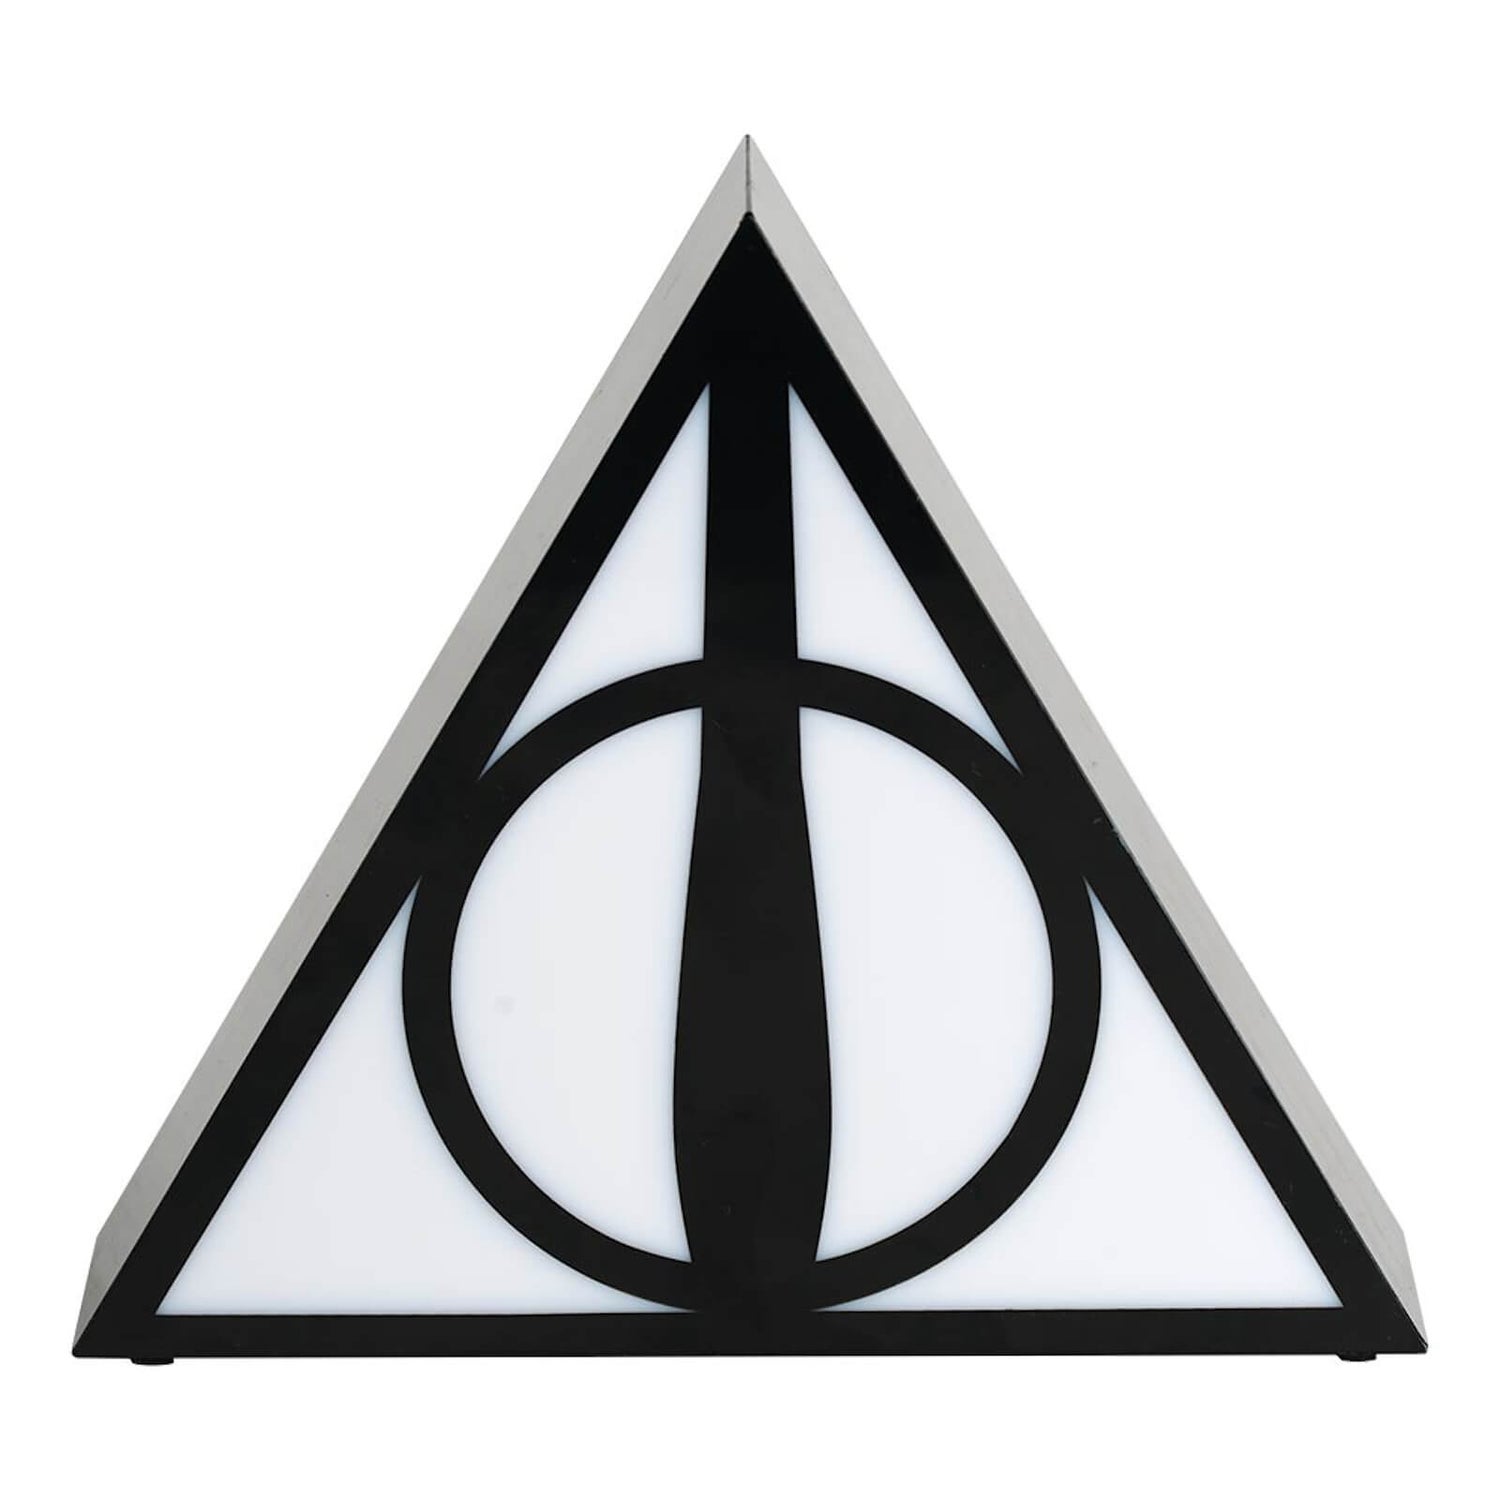 Harry Potter and the Deathly Hallows 8 Inch Desk Lamp